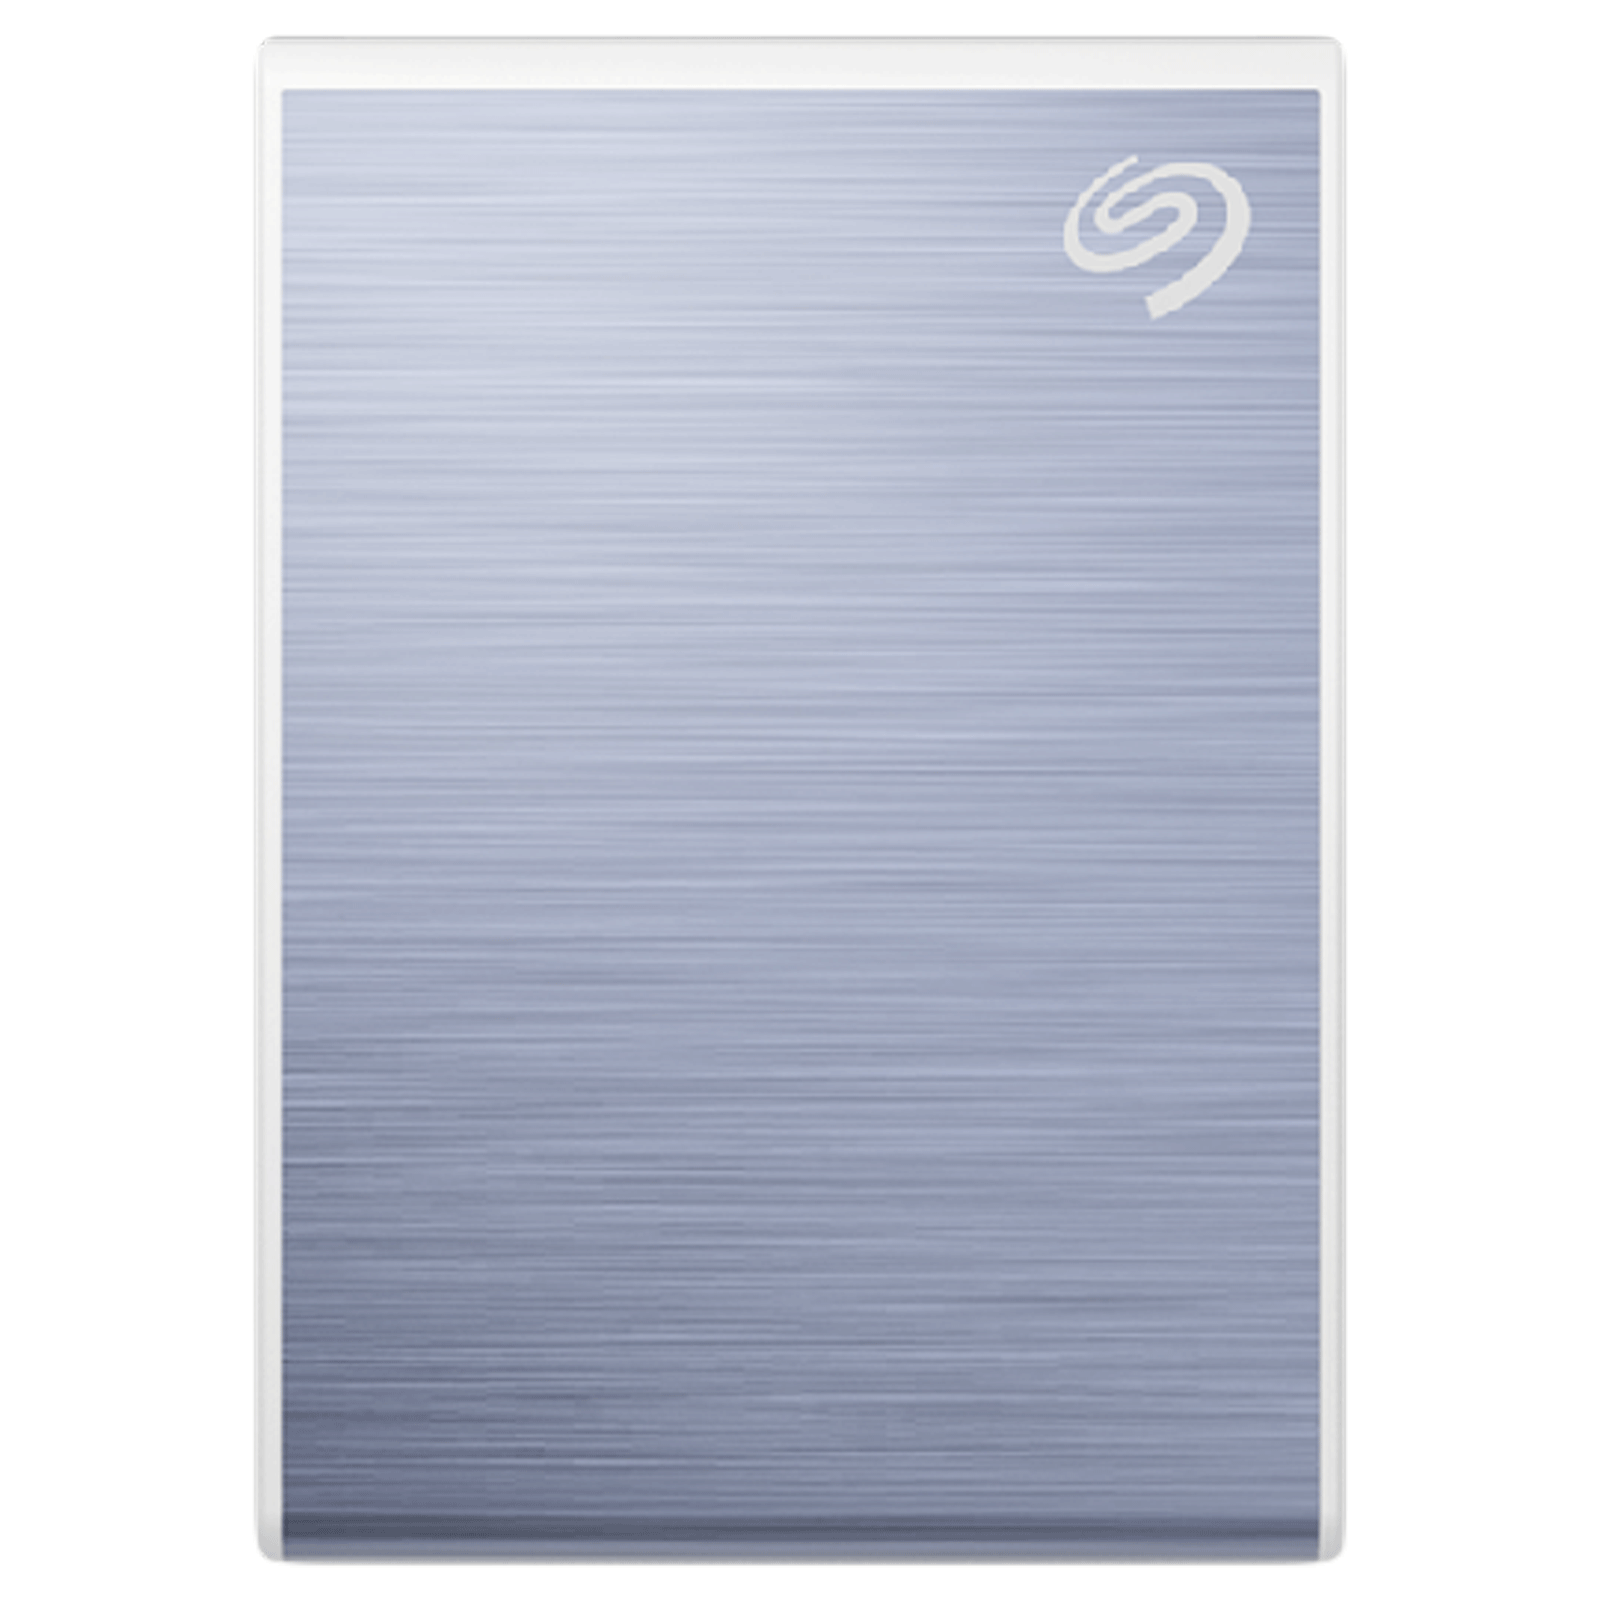 Seagate One Touch 500GB USB Type-C 3.0 Solid State Drive (Steller Style Design, STKG500402, Blue)